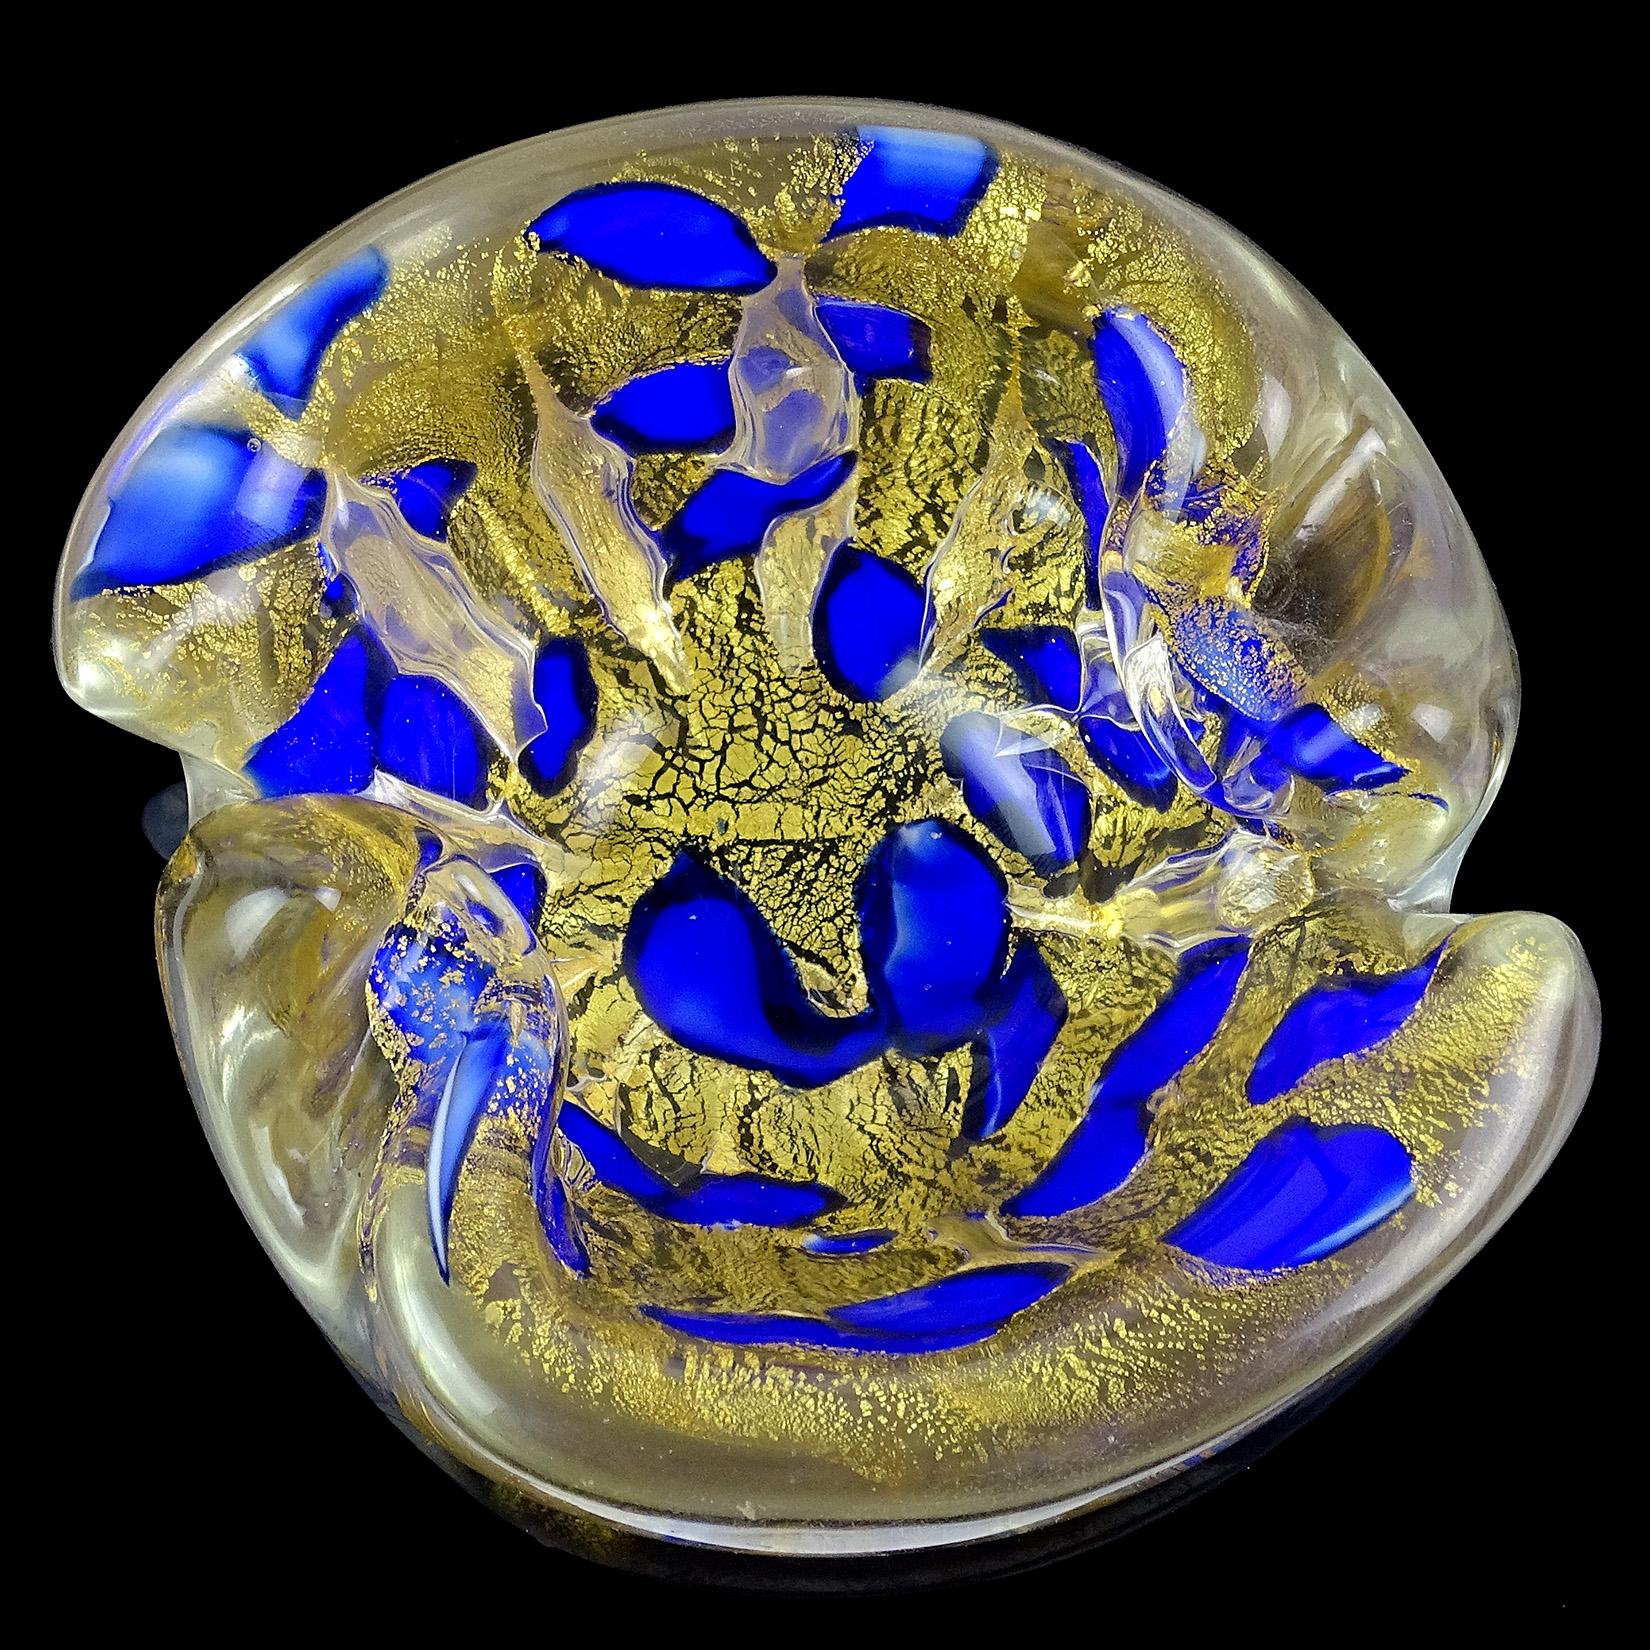 Beautiful vintage Murano hand blown gold flecks Italian art glass bowl or ashtray. Documented to the Barovier e Toso Company. Decorated with cobalt blue color spots. The bowl is created with very thick and heavy glass. It has a scissor cut rim, with